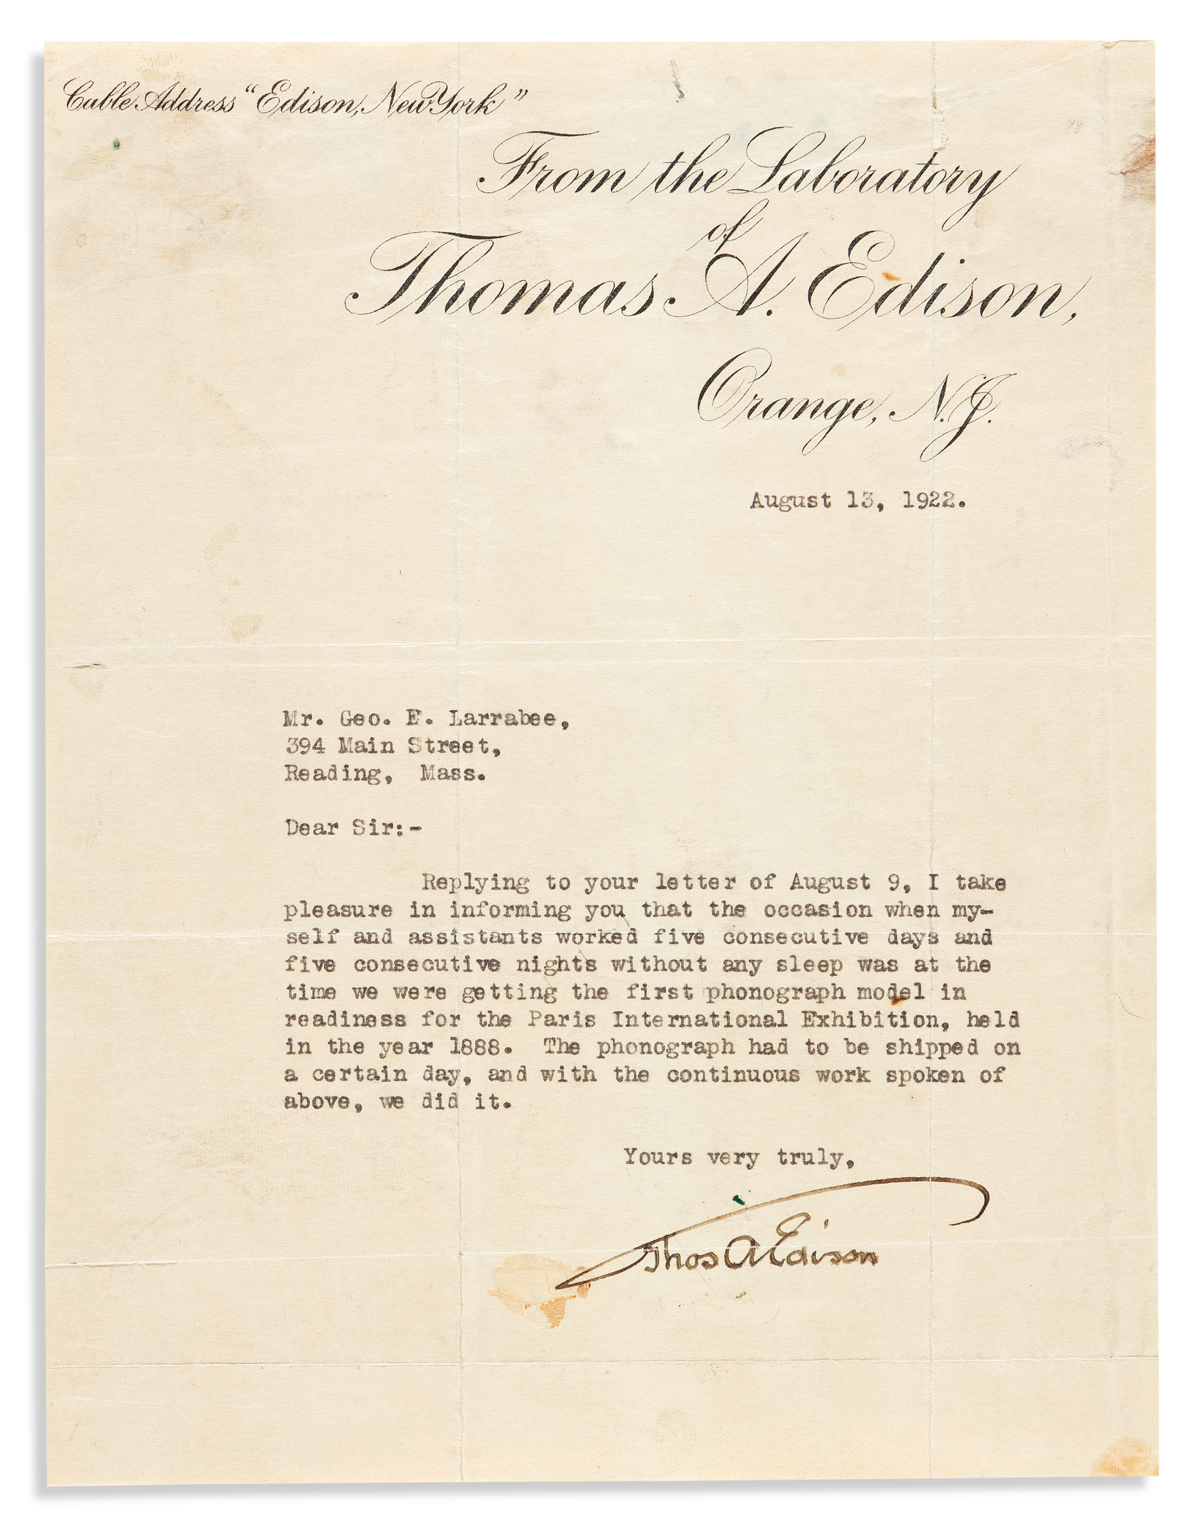 (INVENTORS.) EDISON, THOMAS A. Typed Letter Signed, to George E. Larrabee,